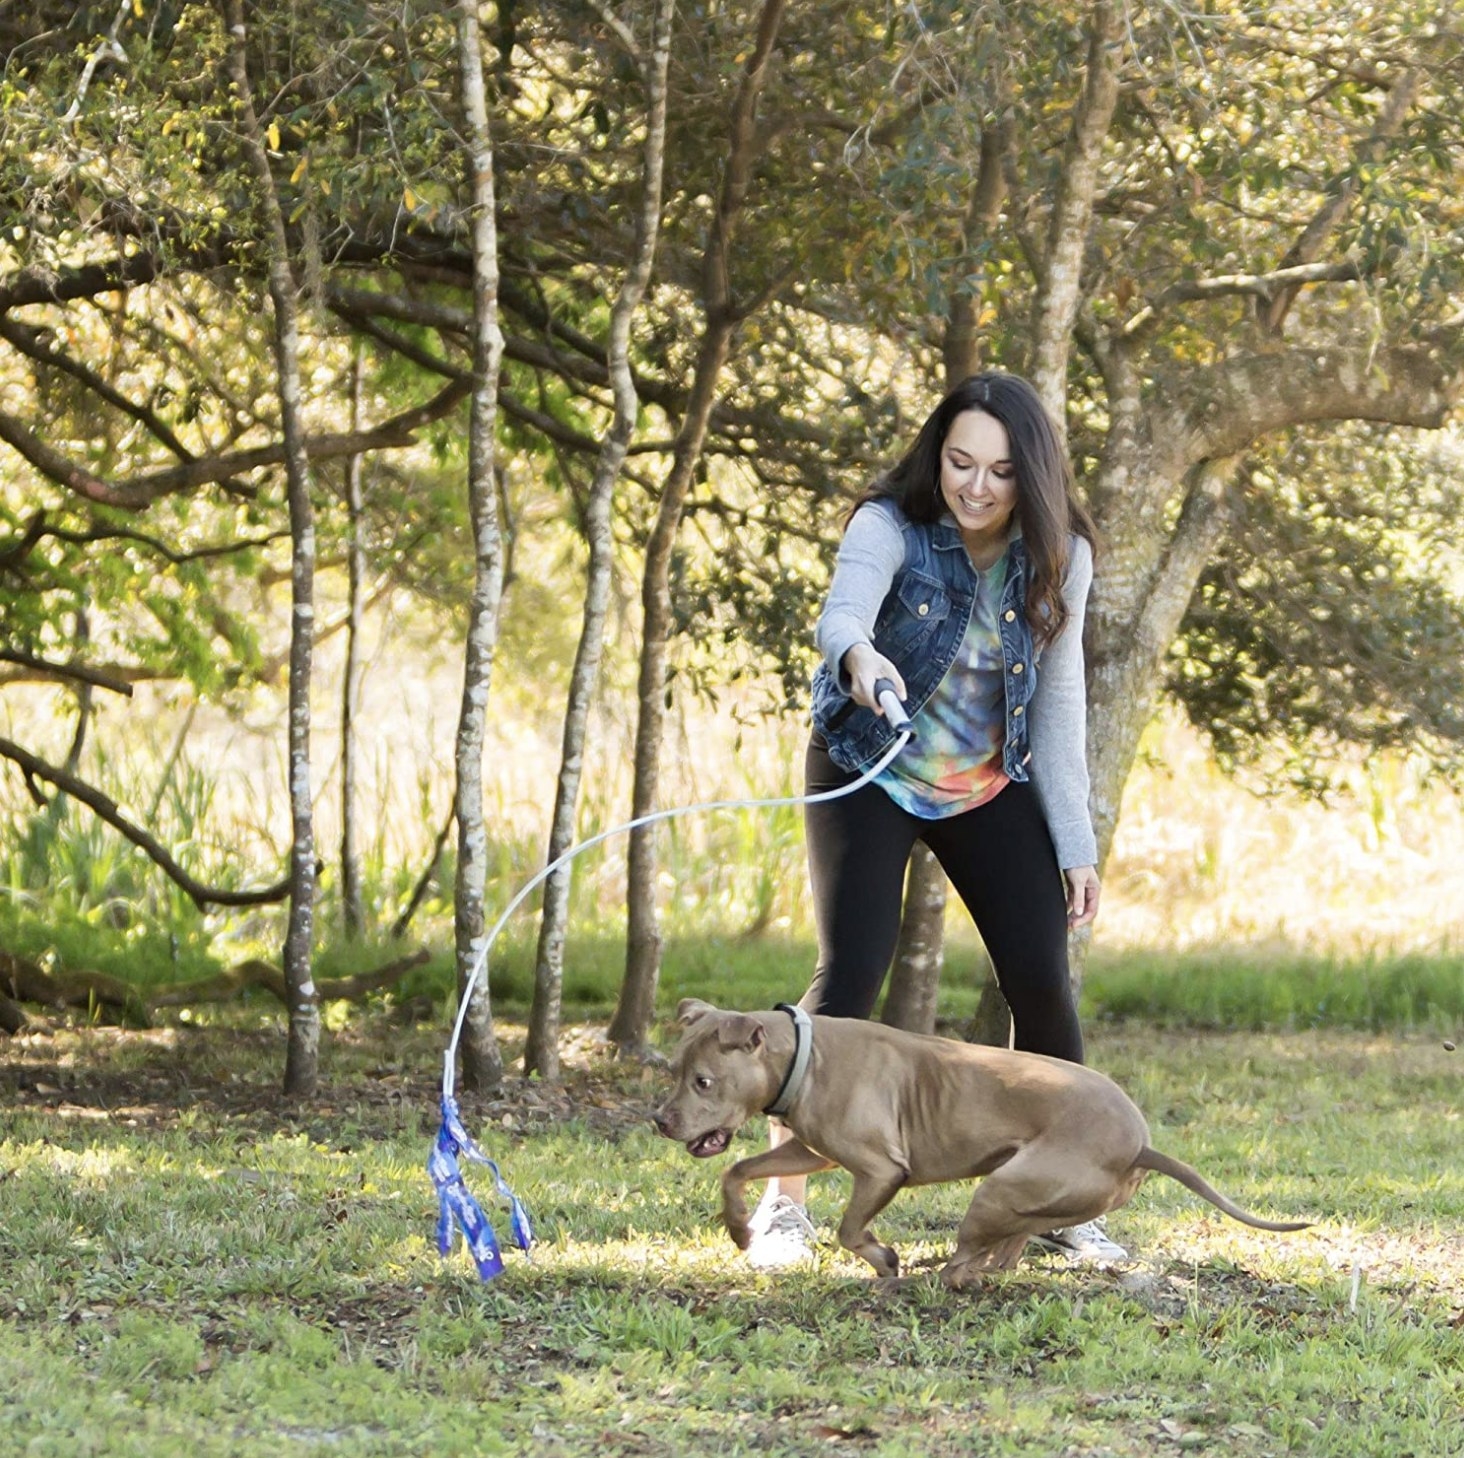 model holding the pole rope with their dog chasing after it